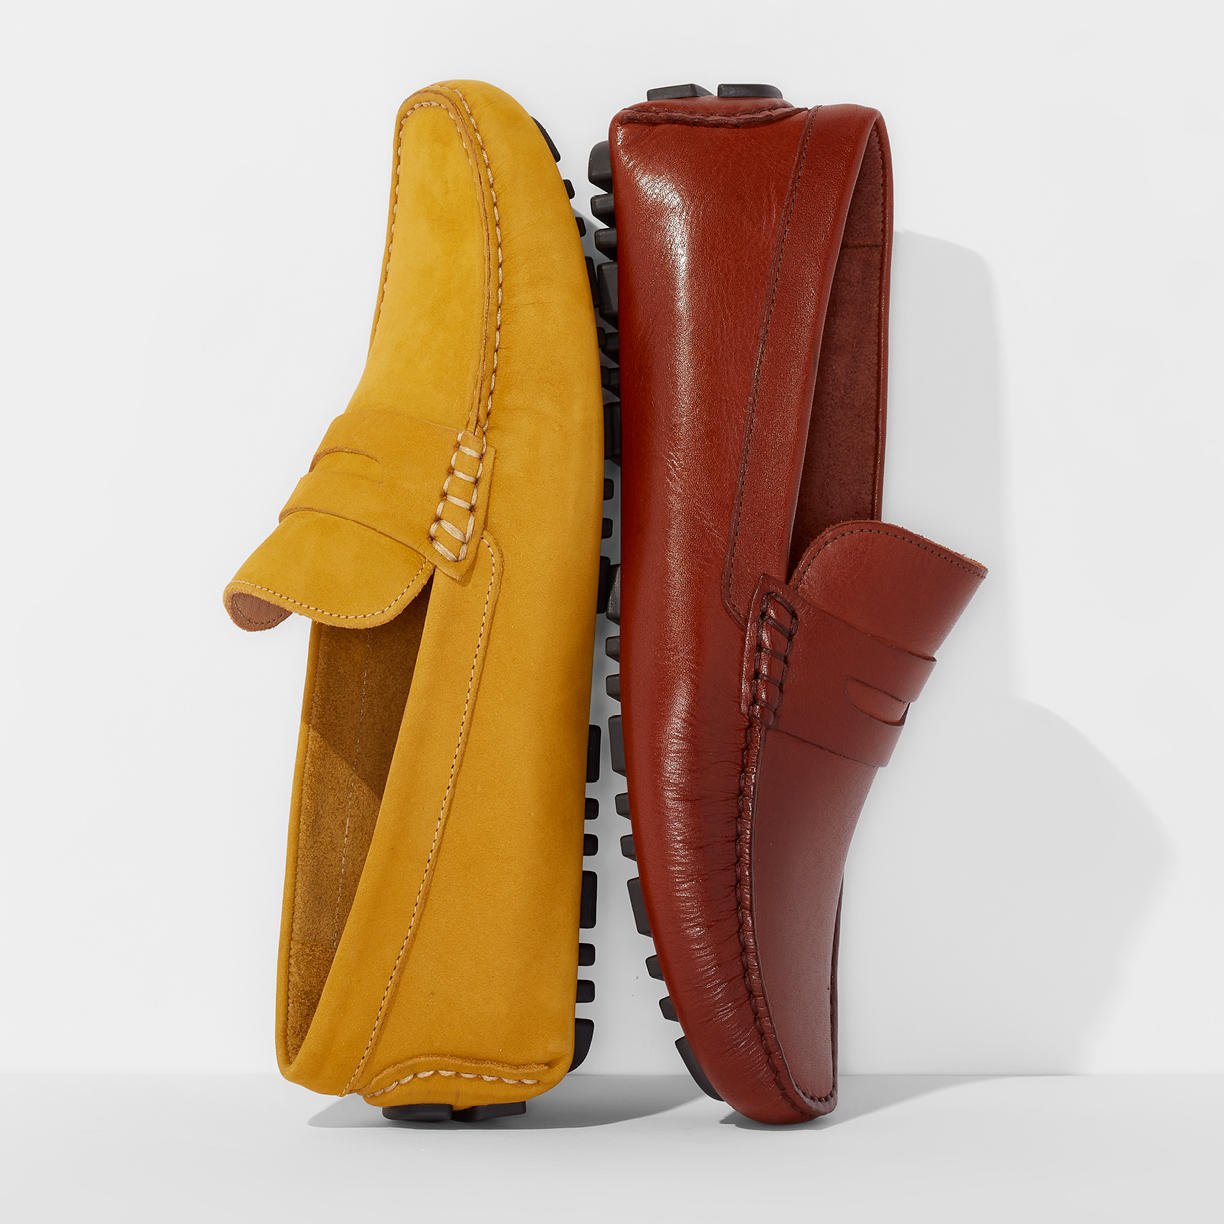 Shoe Shop: Men's Loafers and Dress Shoes Up to 60% Off